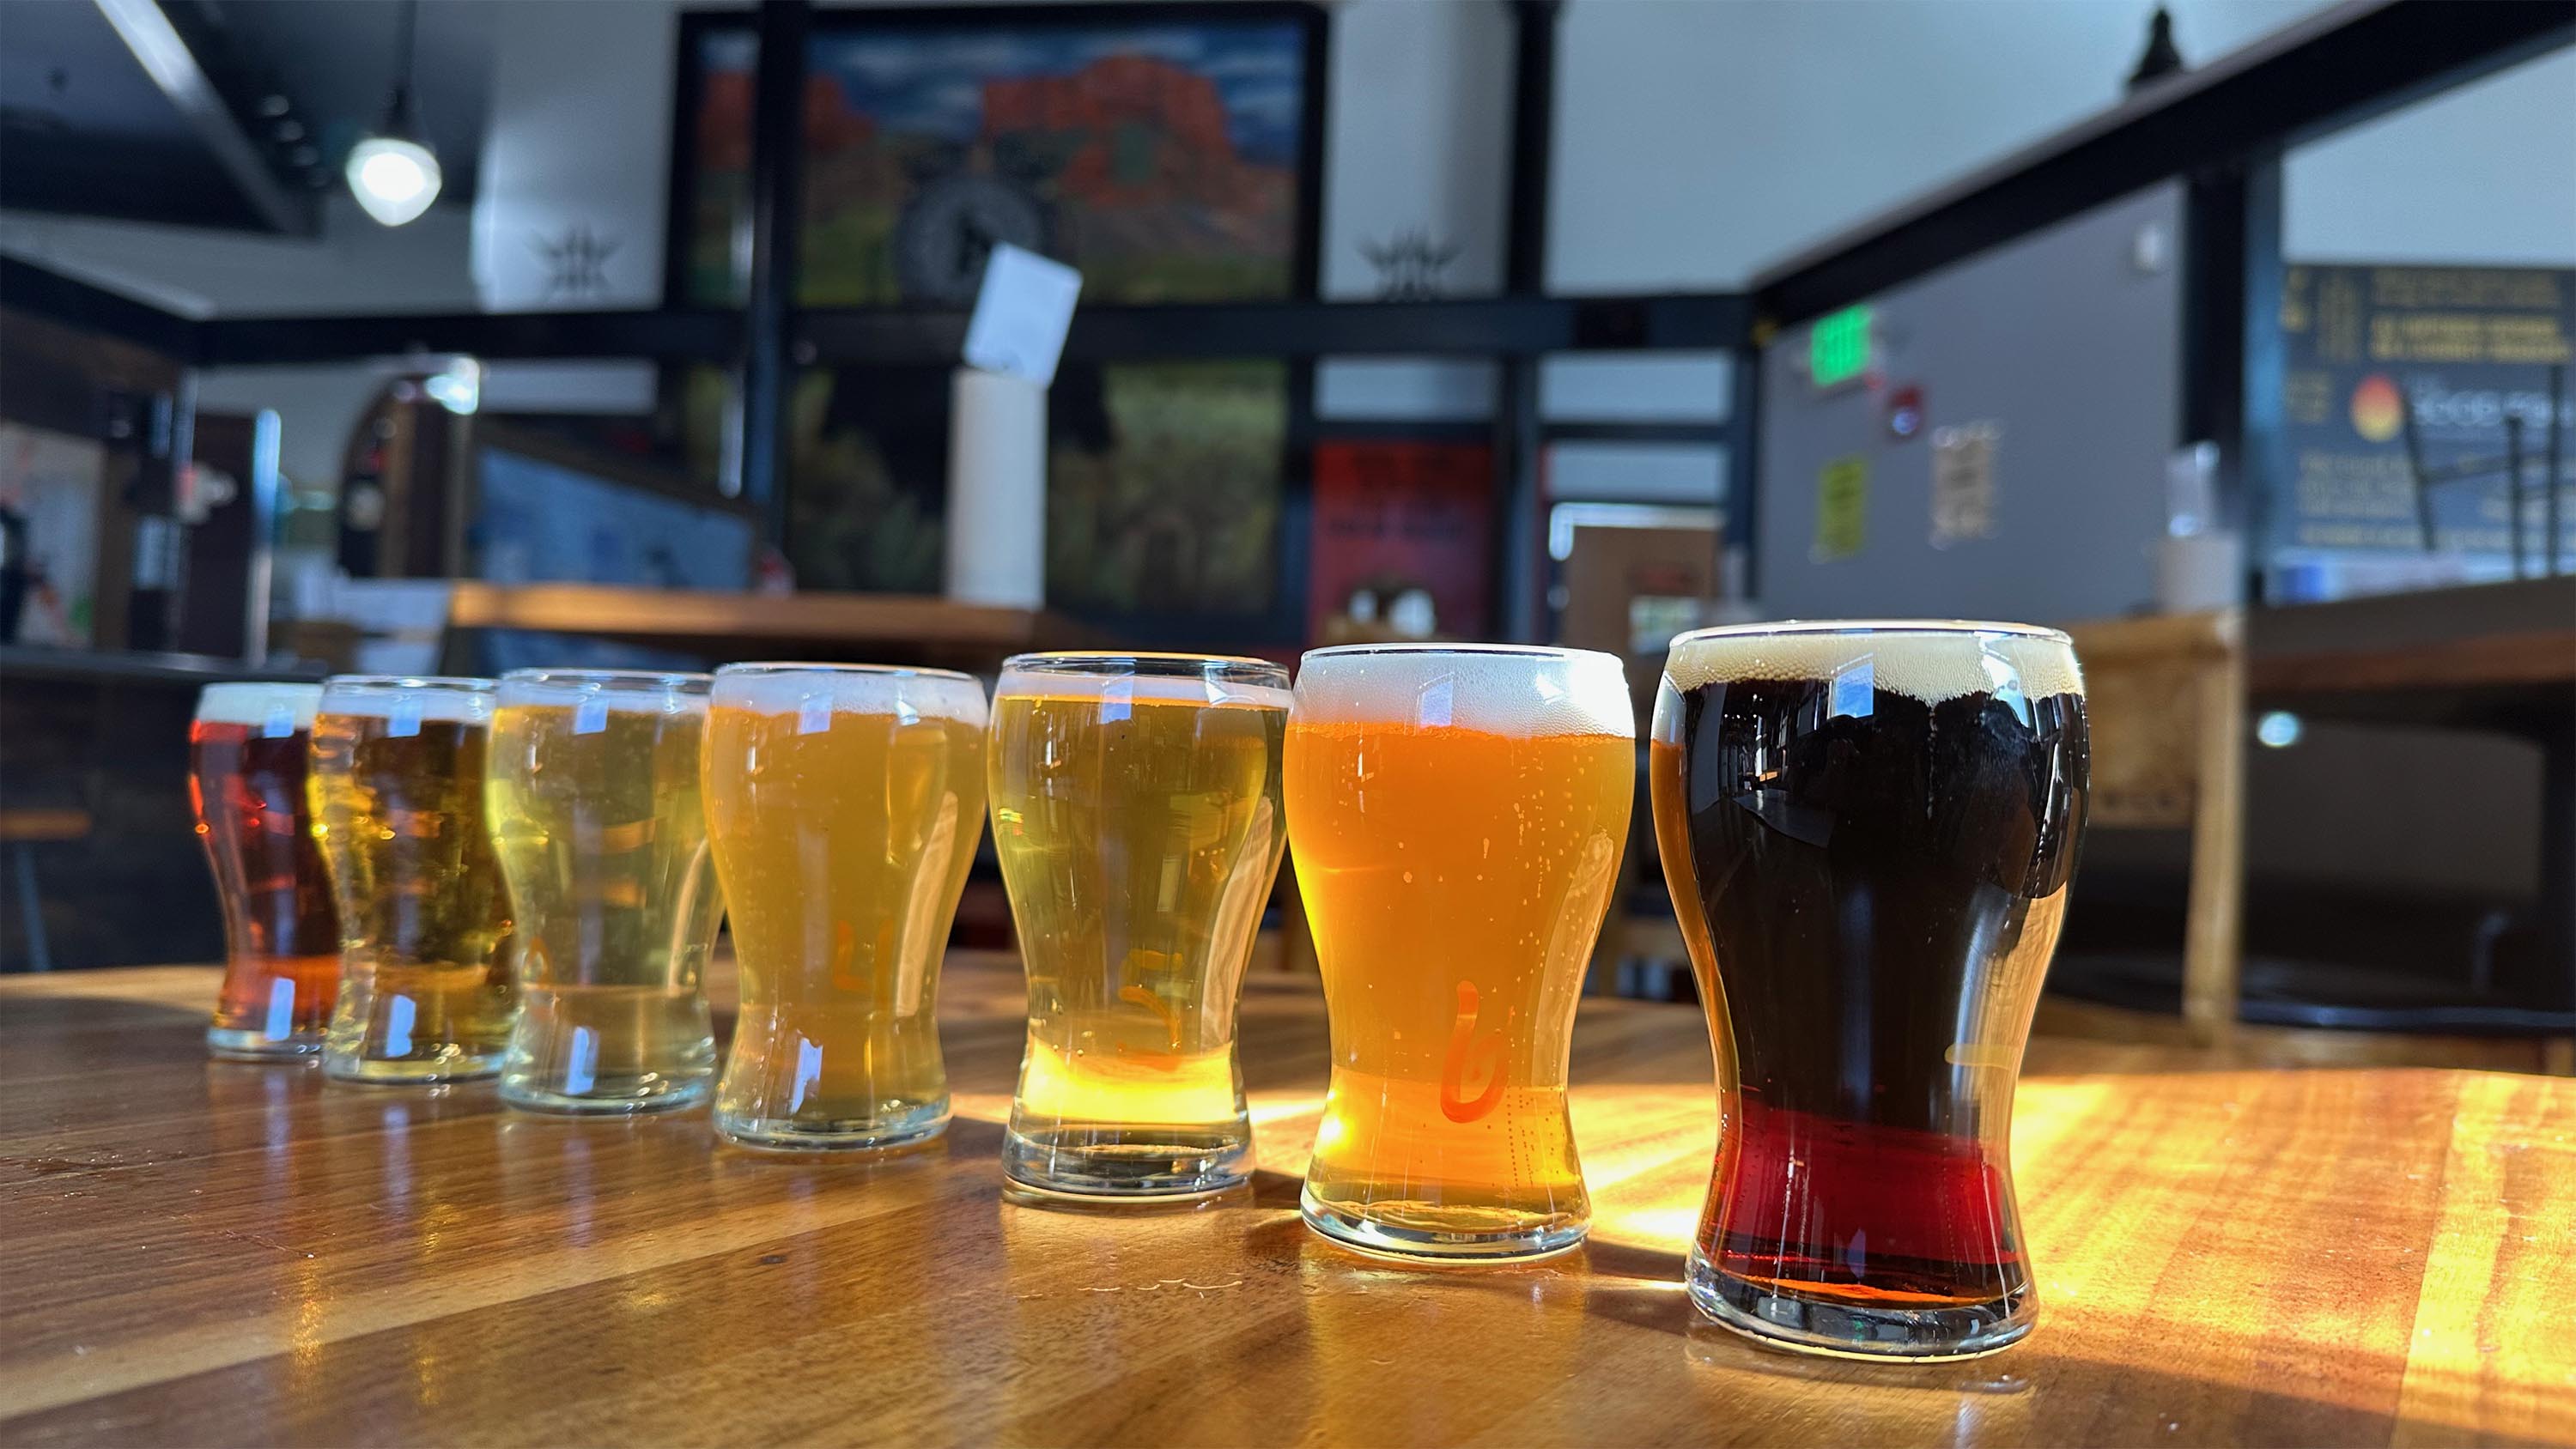 A flight of beer is the perfect accompaniment to a hearty breakfast at Accomplice Beer Company and The Good Egg. Photo Credit: Amber Leberman